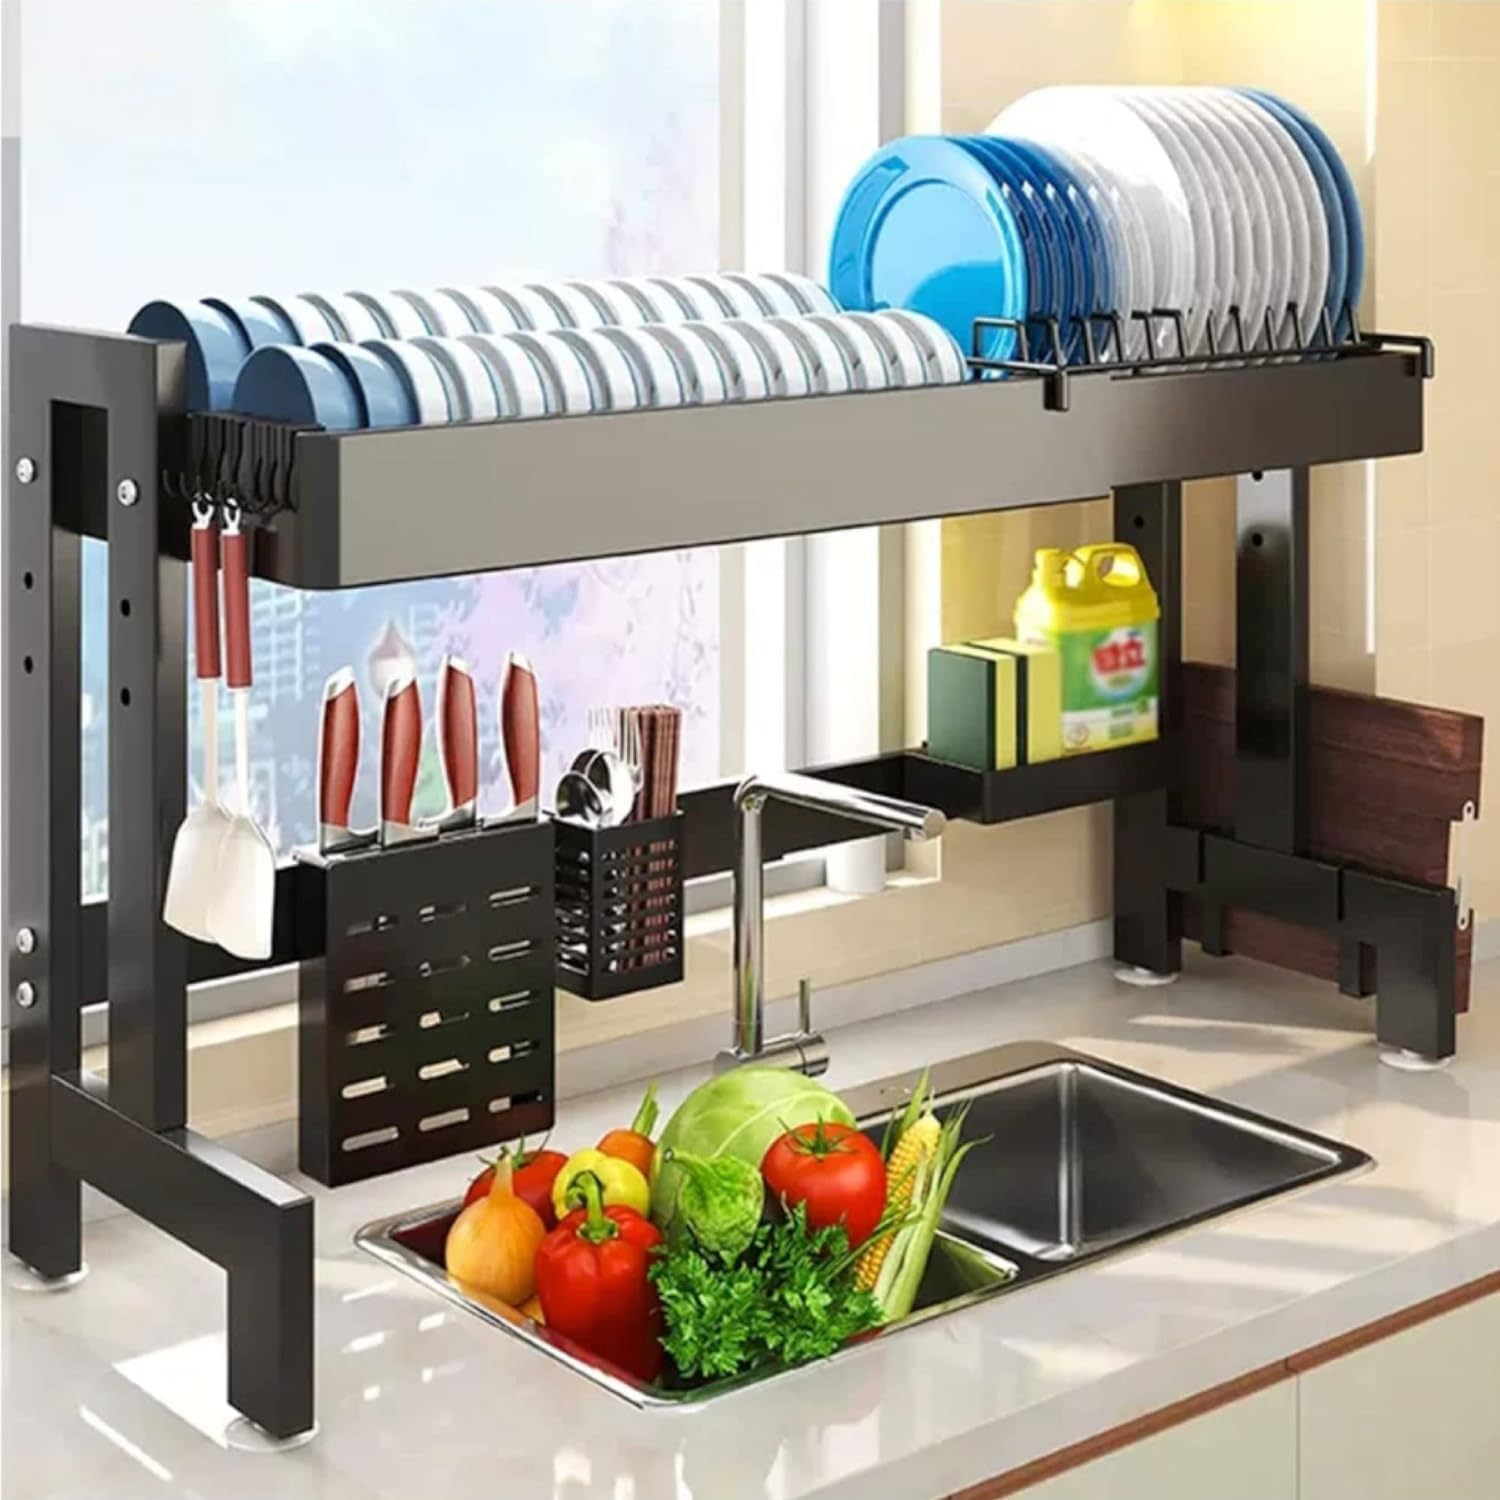 Efficient Kitchen Space Saver: Adjustable Over-The-Sink Dish Drying Rack with 2 Tiers